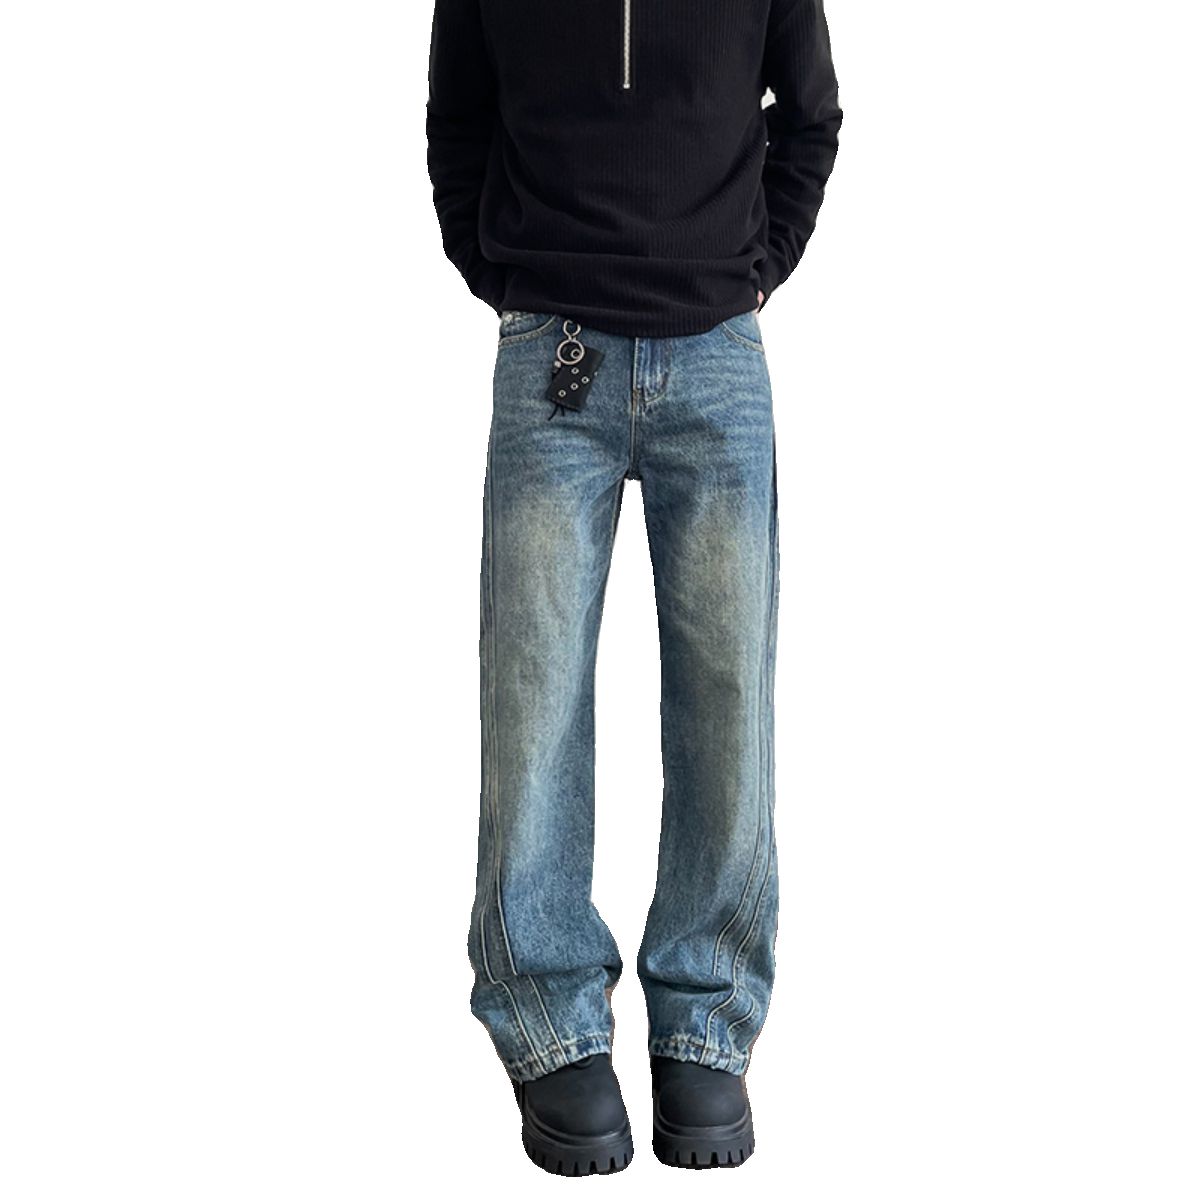 Distressed Structured Jeans Korean Street Fashion Jeans By A PUEE Shop Online at OH Vault